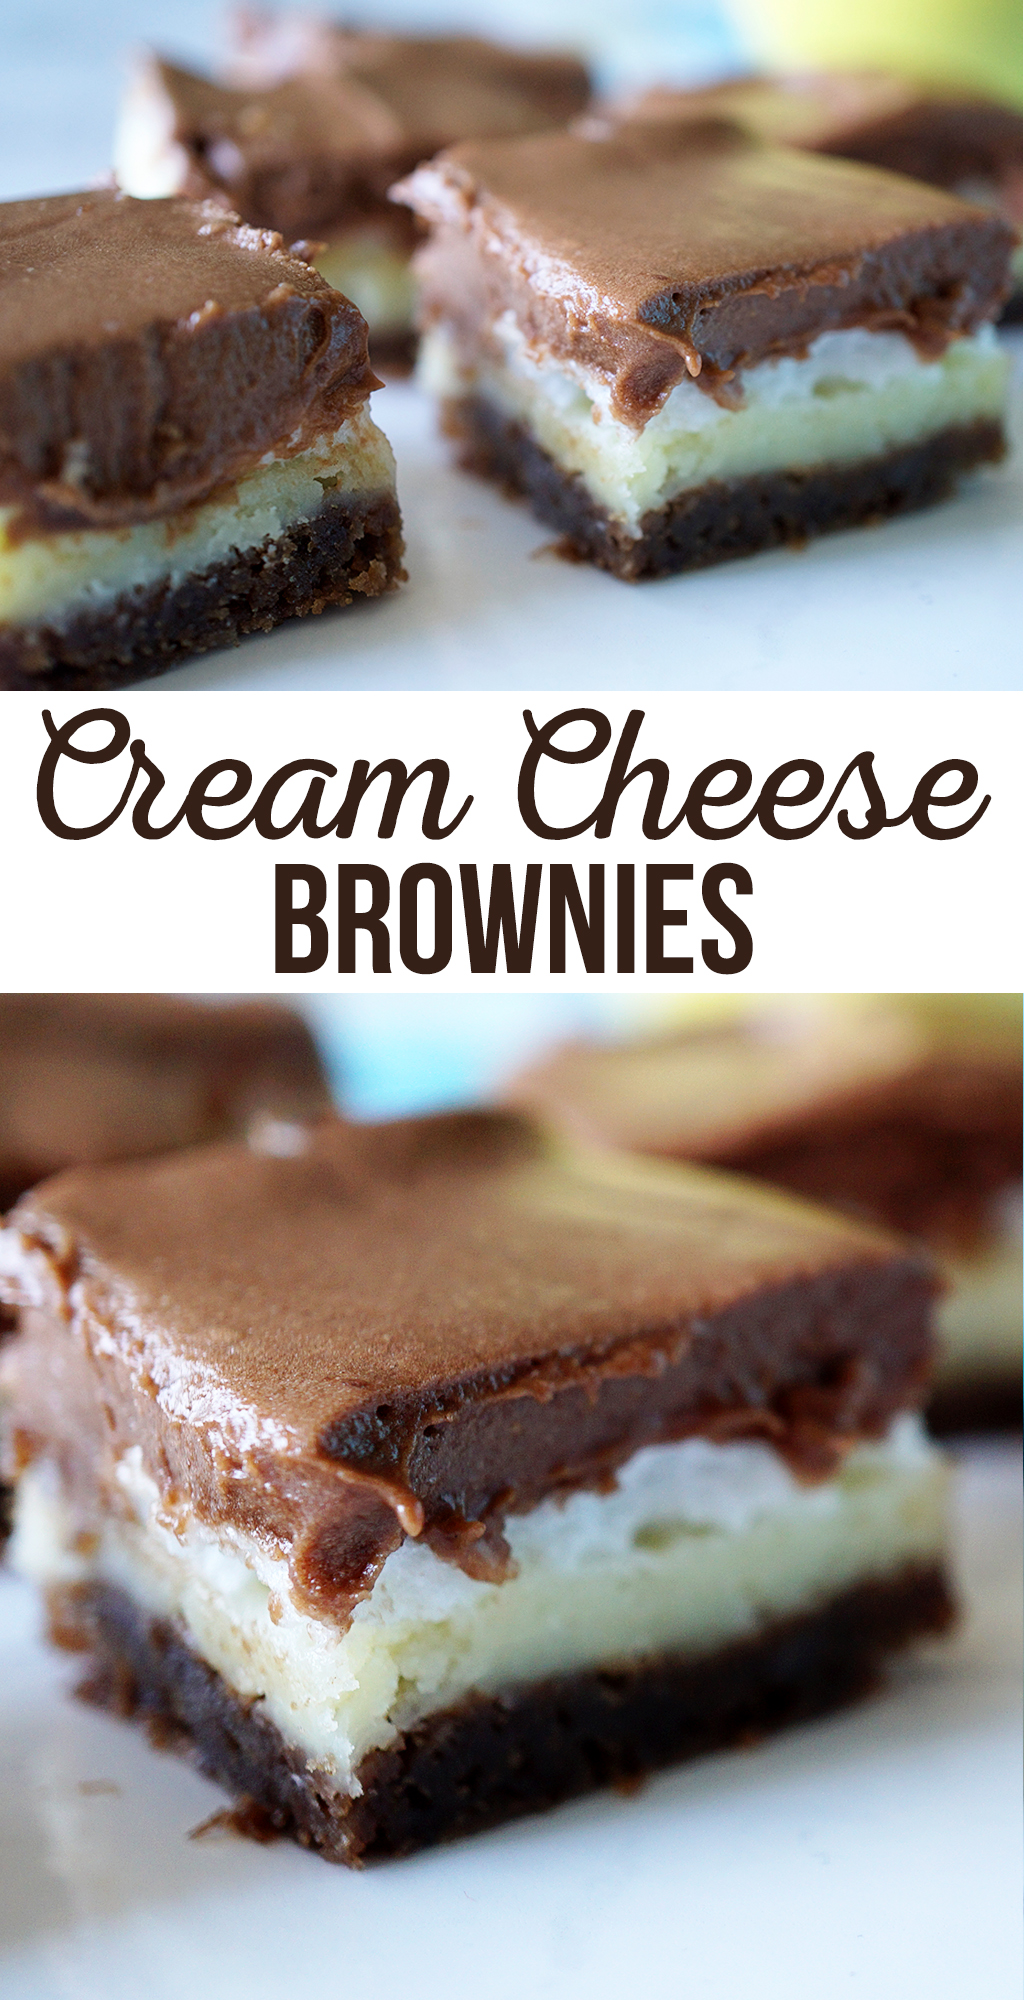 Cream Cheese Brownies take brownies to a whole new level! With 4 decadent layers of cream cheese, marshmallow and of course chocolate.